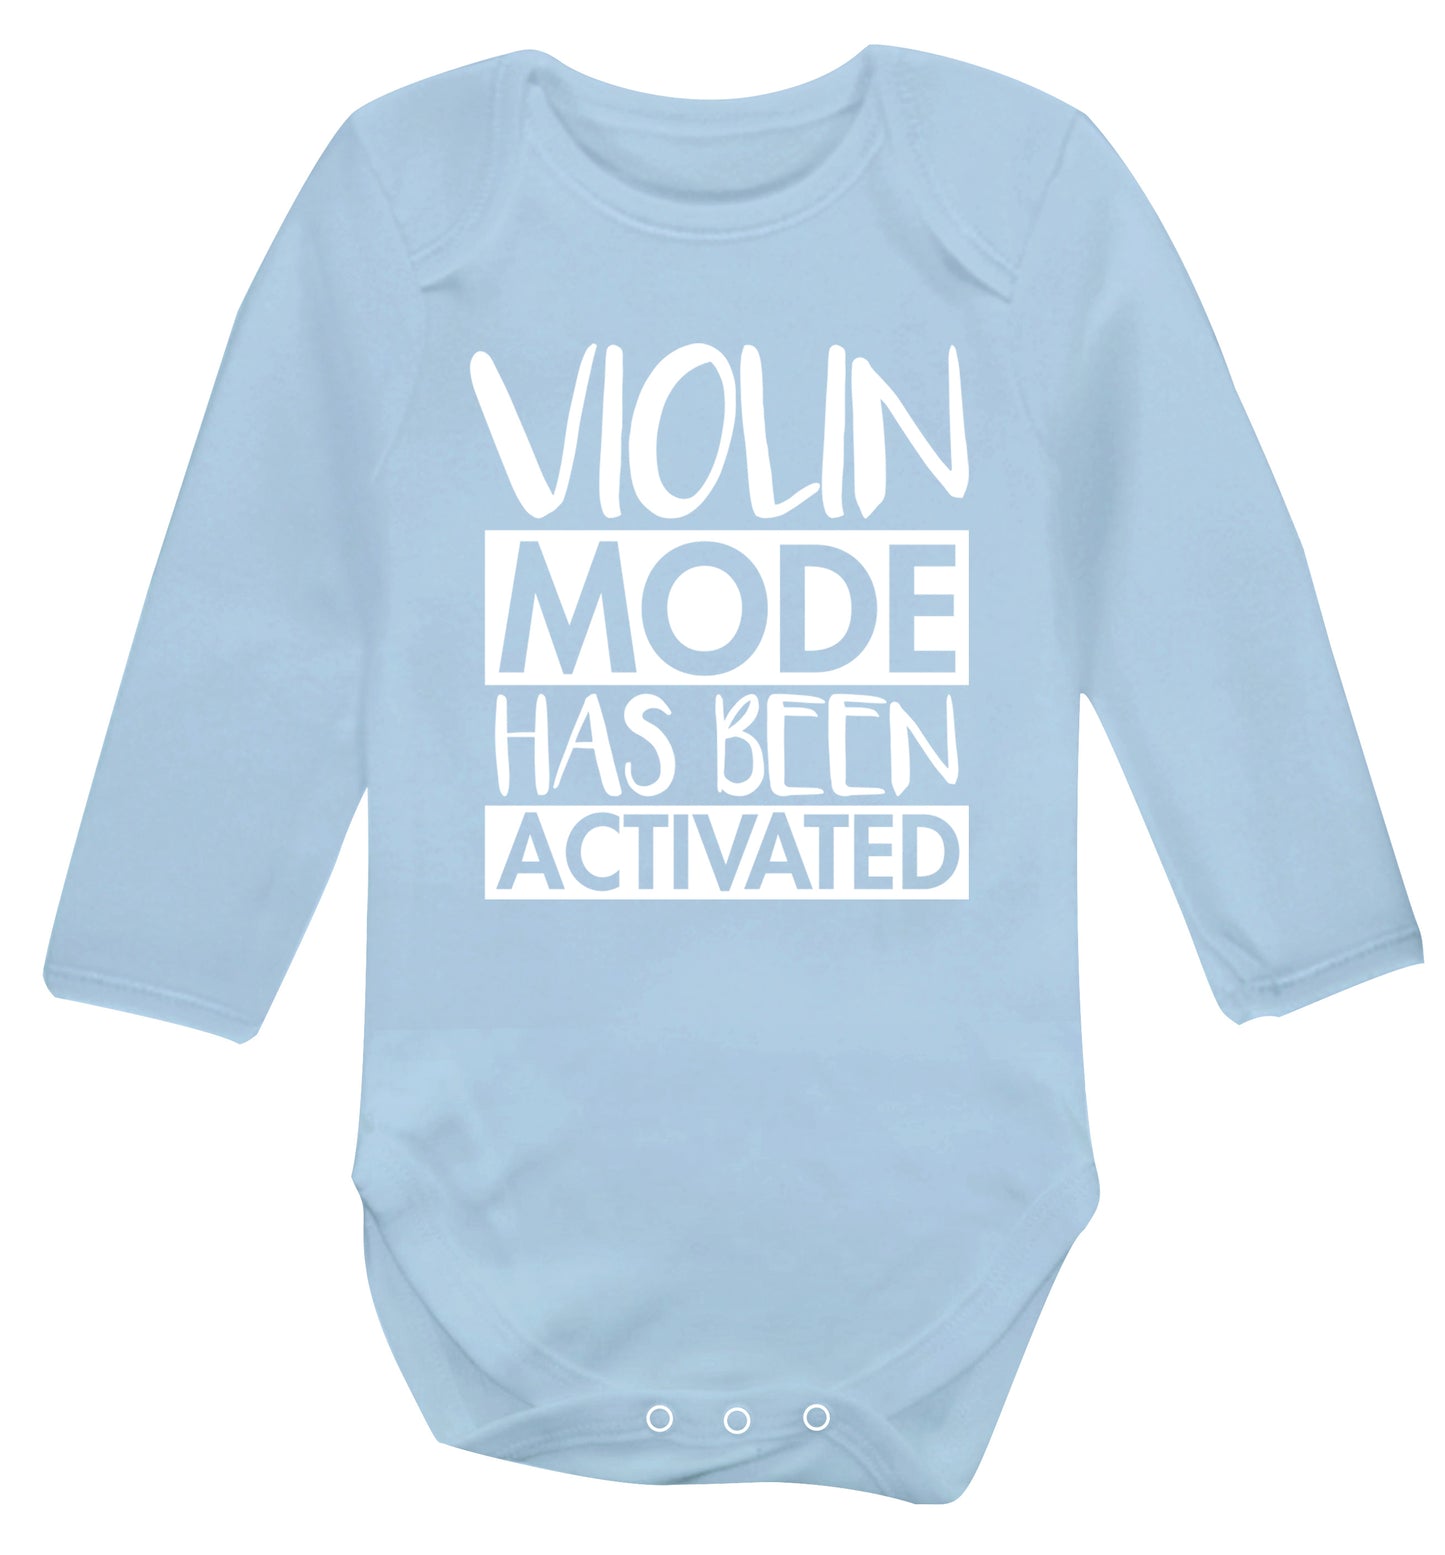 Violin Mode Activated Baby Vest long sleeved pale blue 6-12 months